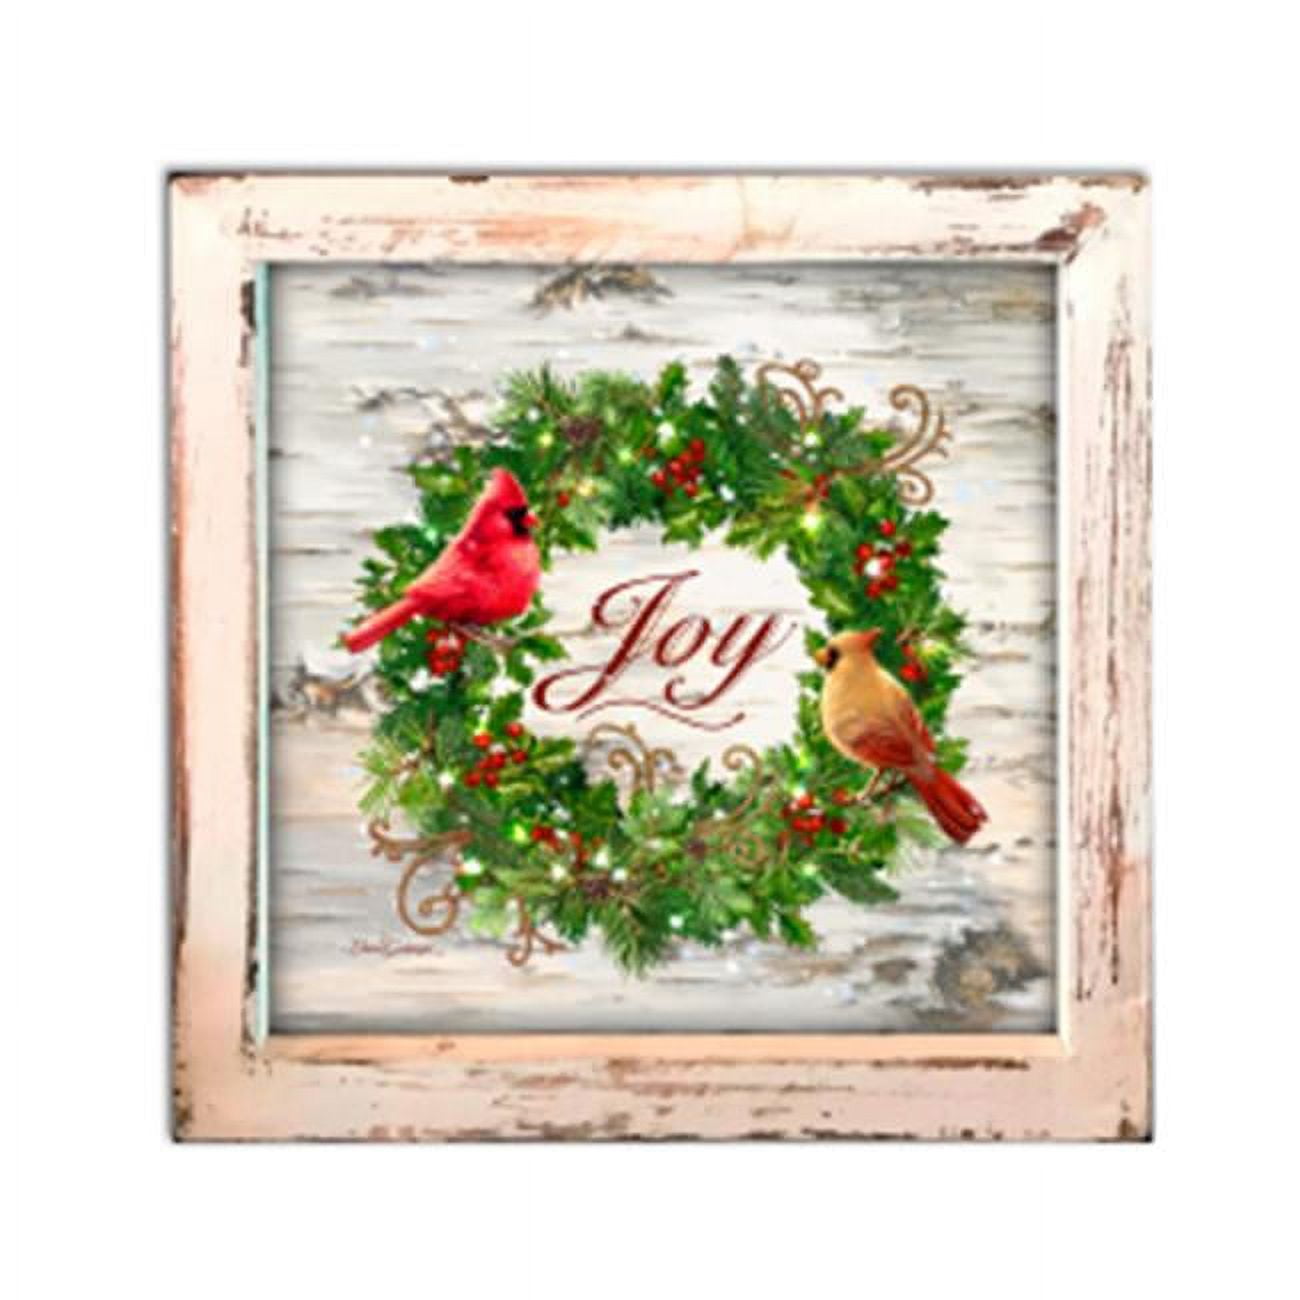 Glow Decor 137706 Cardinal Wreath-led Tabletop Canvas Shadow Box With Timer, 8 X 8 X 2 In.